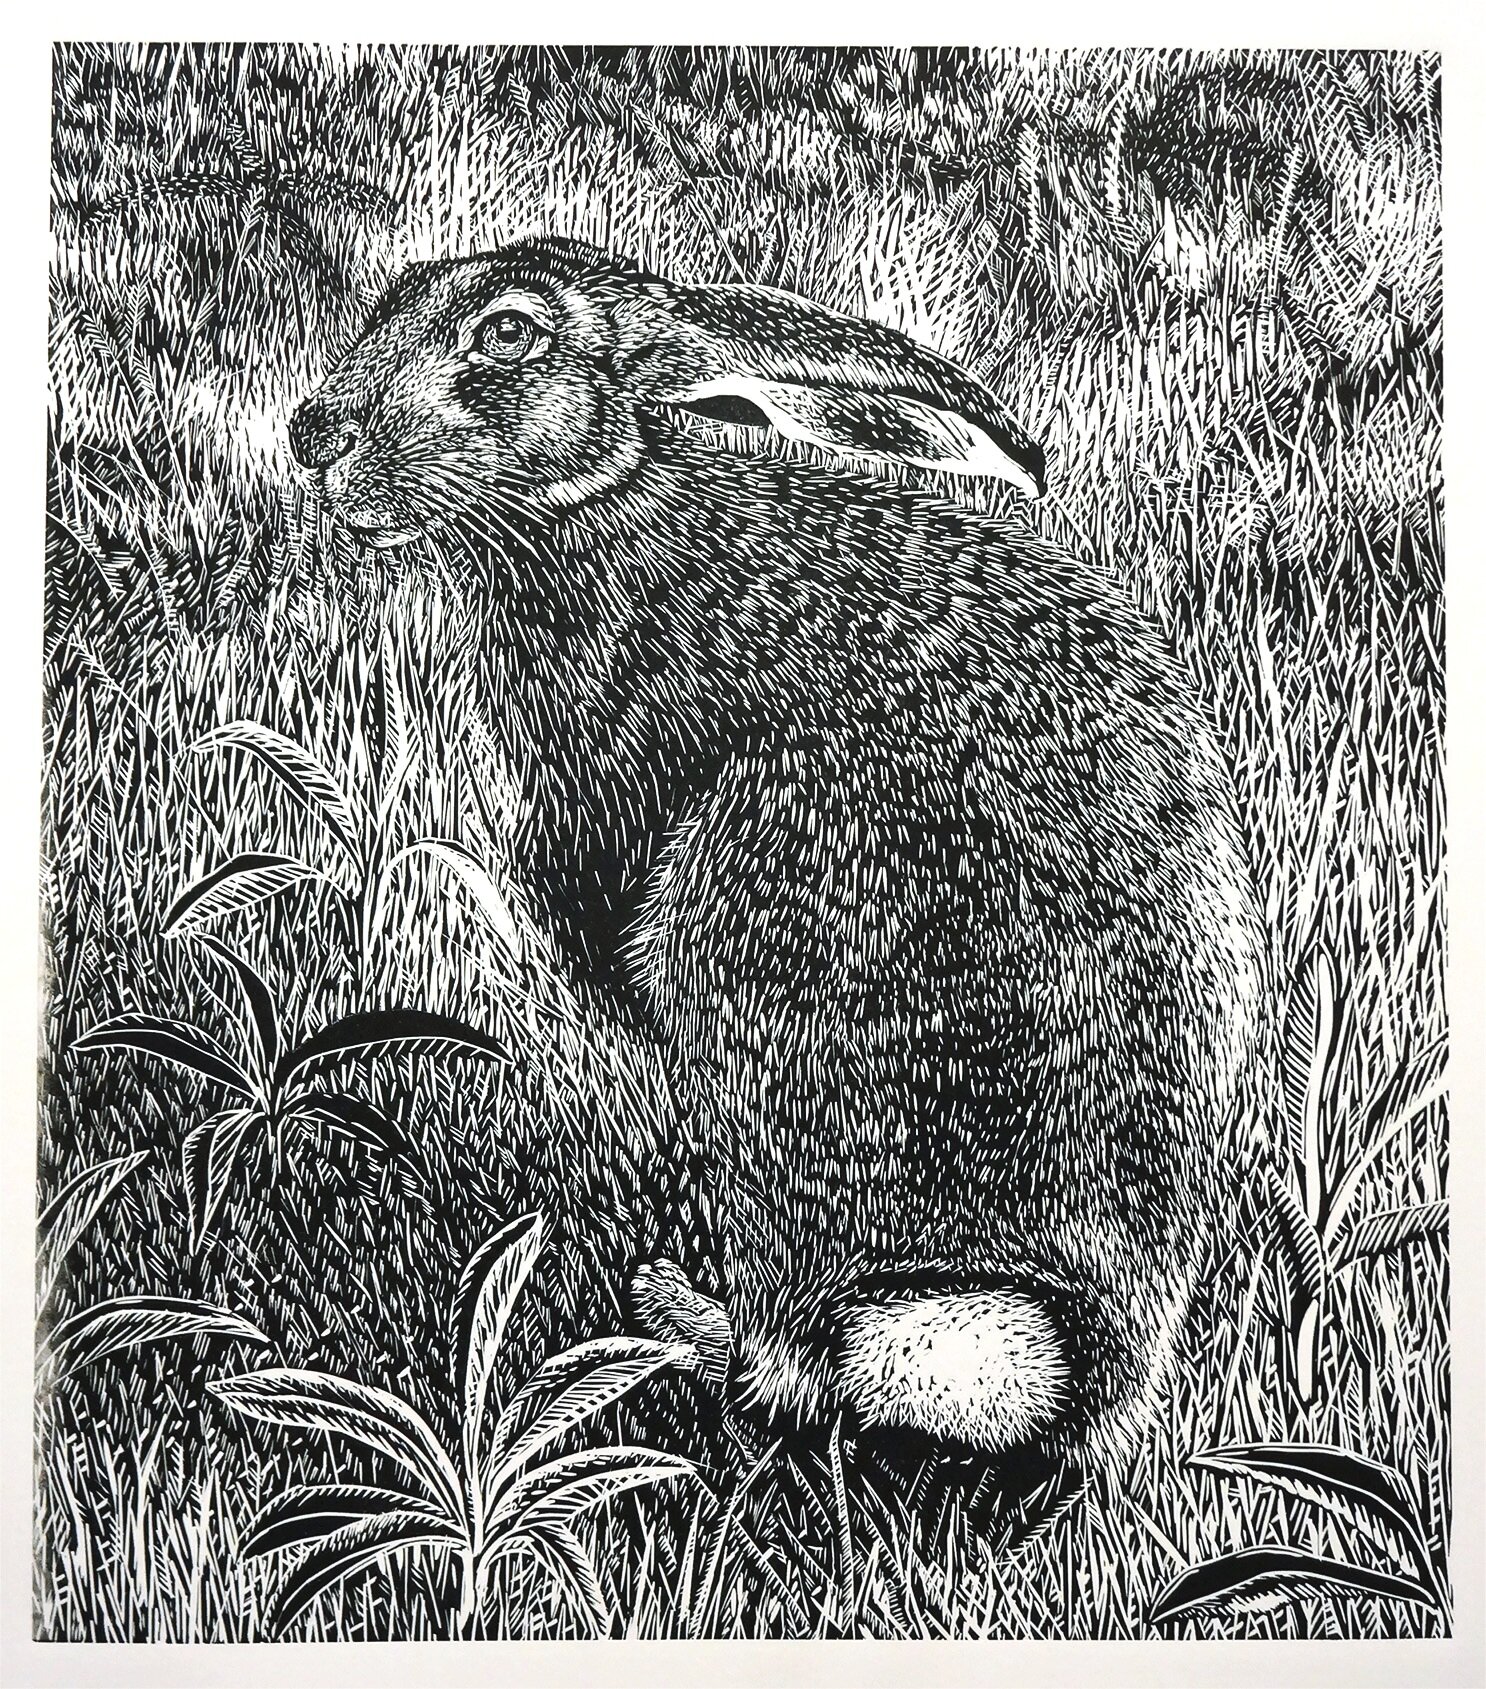 European Hare | 2016 | relief print | available